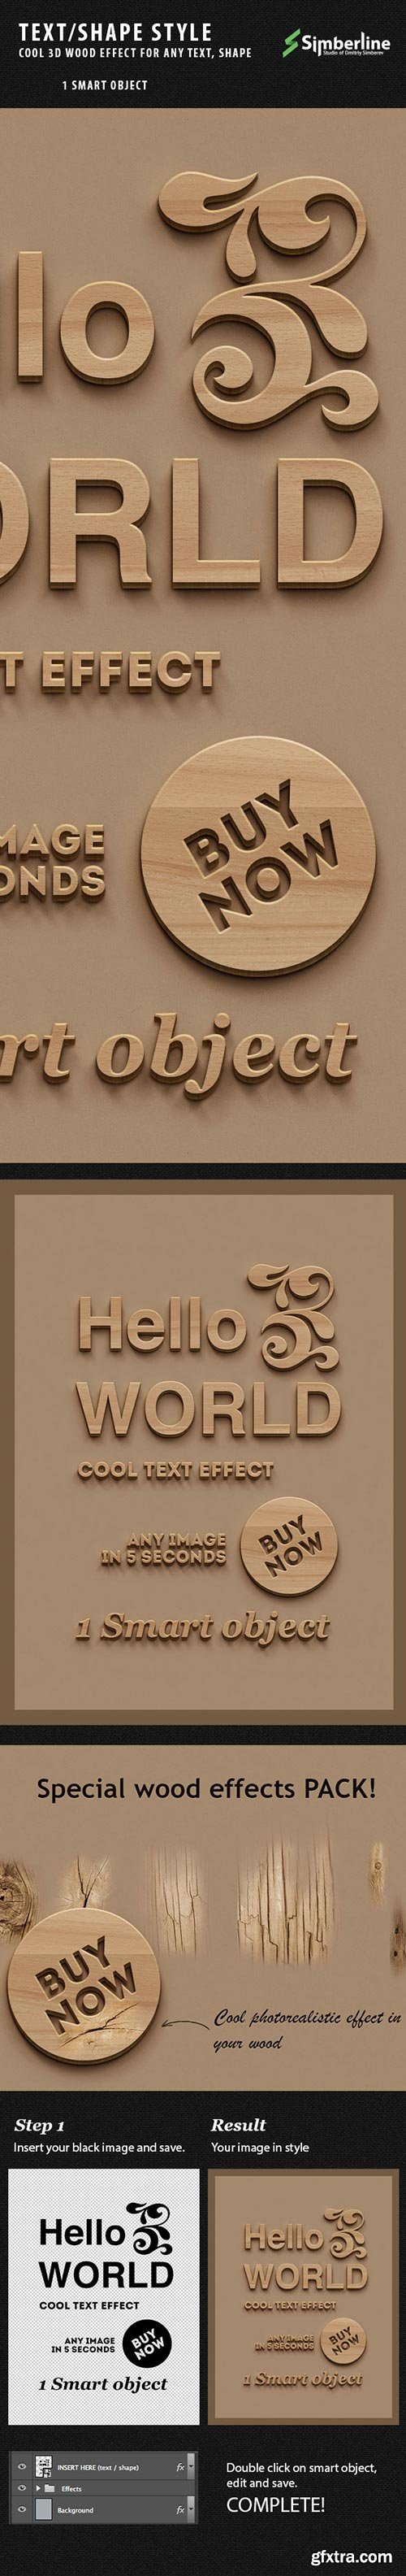 GraphicRiver - Wall MockUp - Wood Style